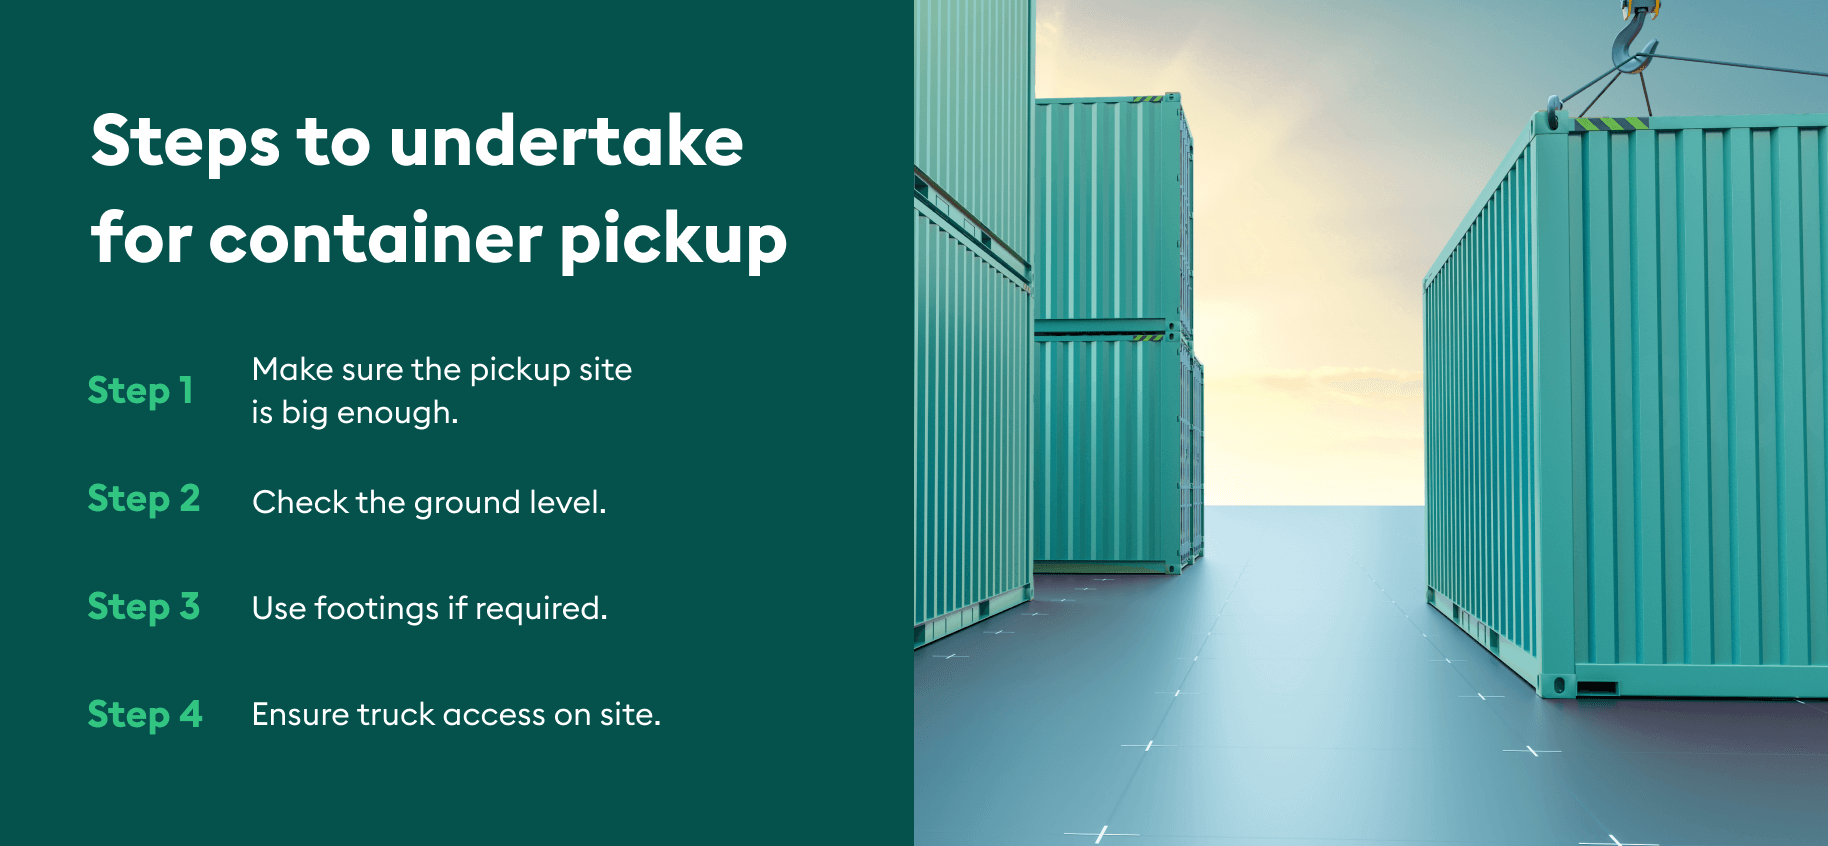 steps to follow for container pick up